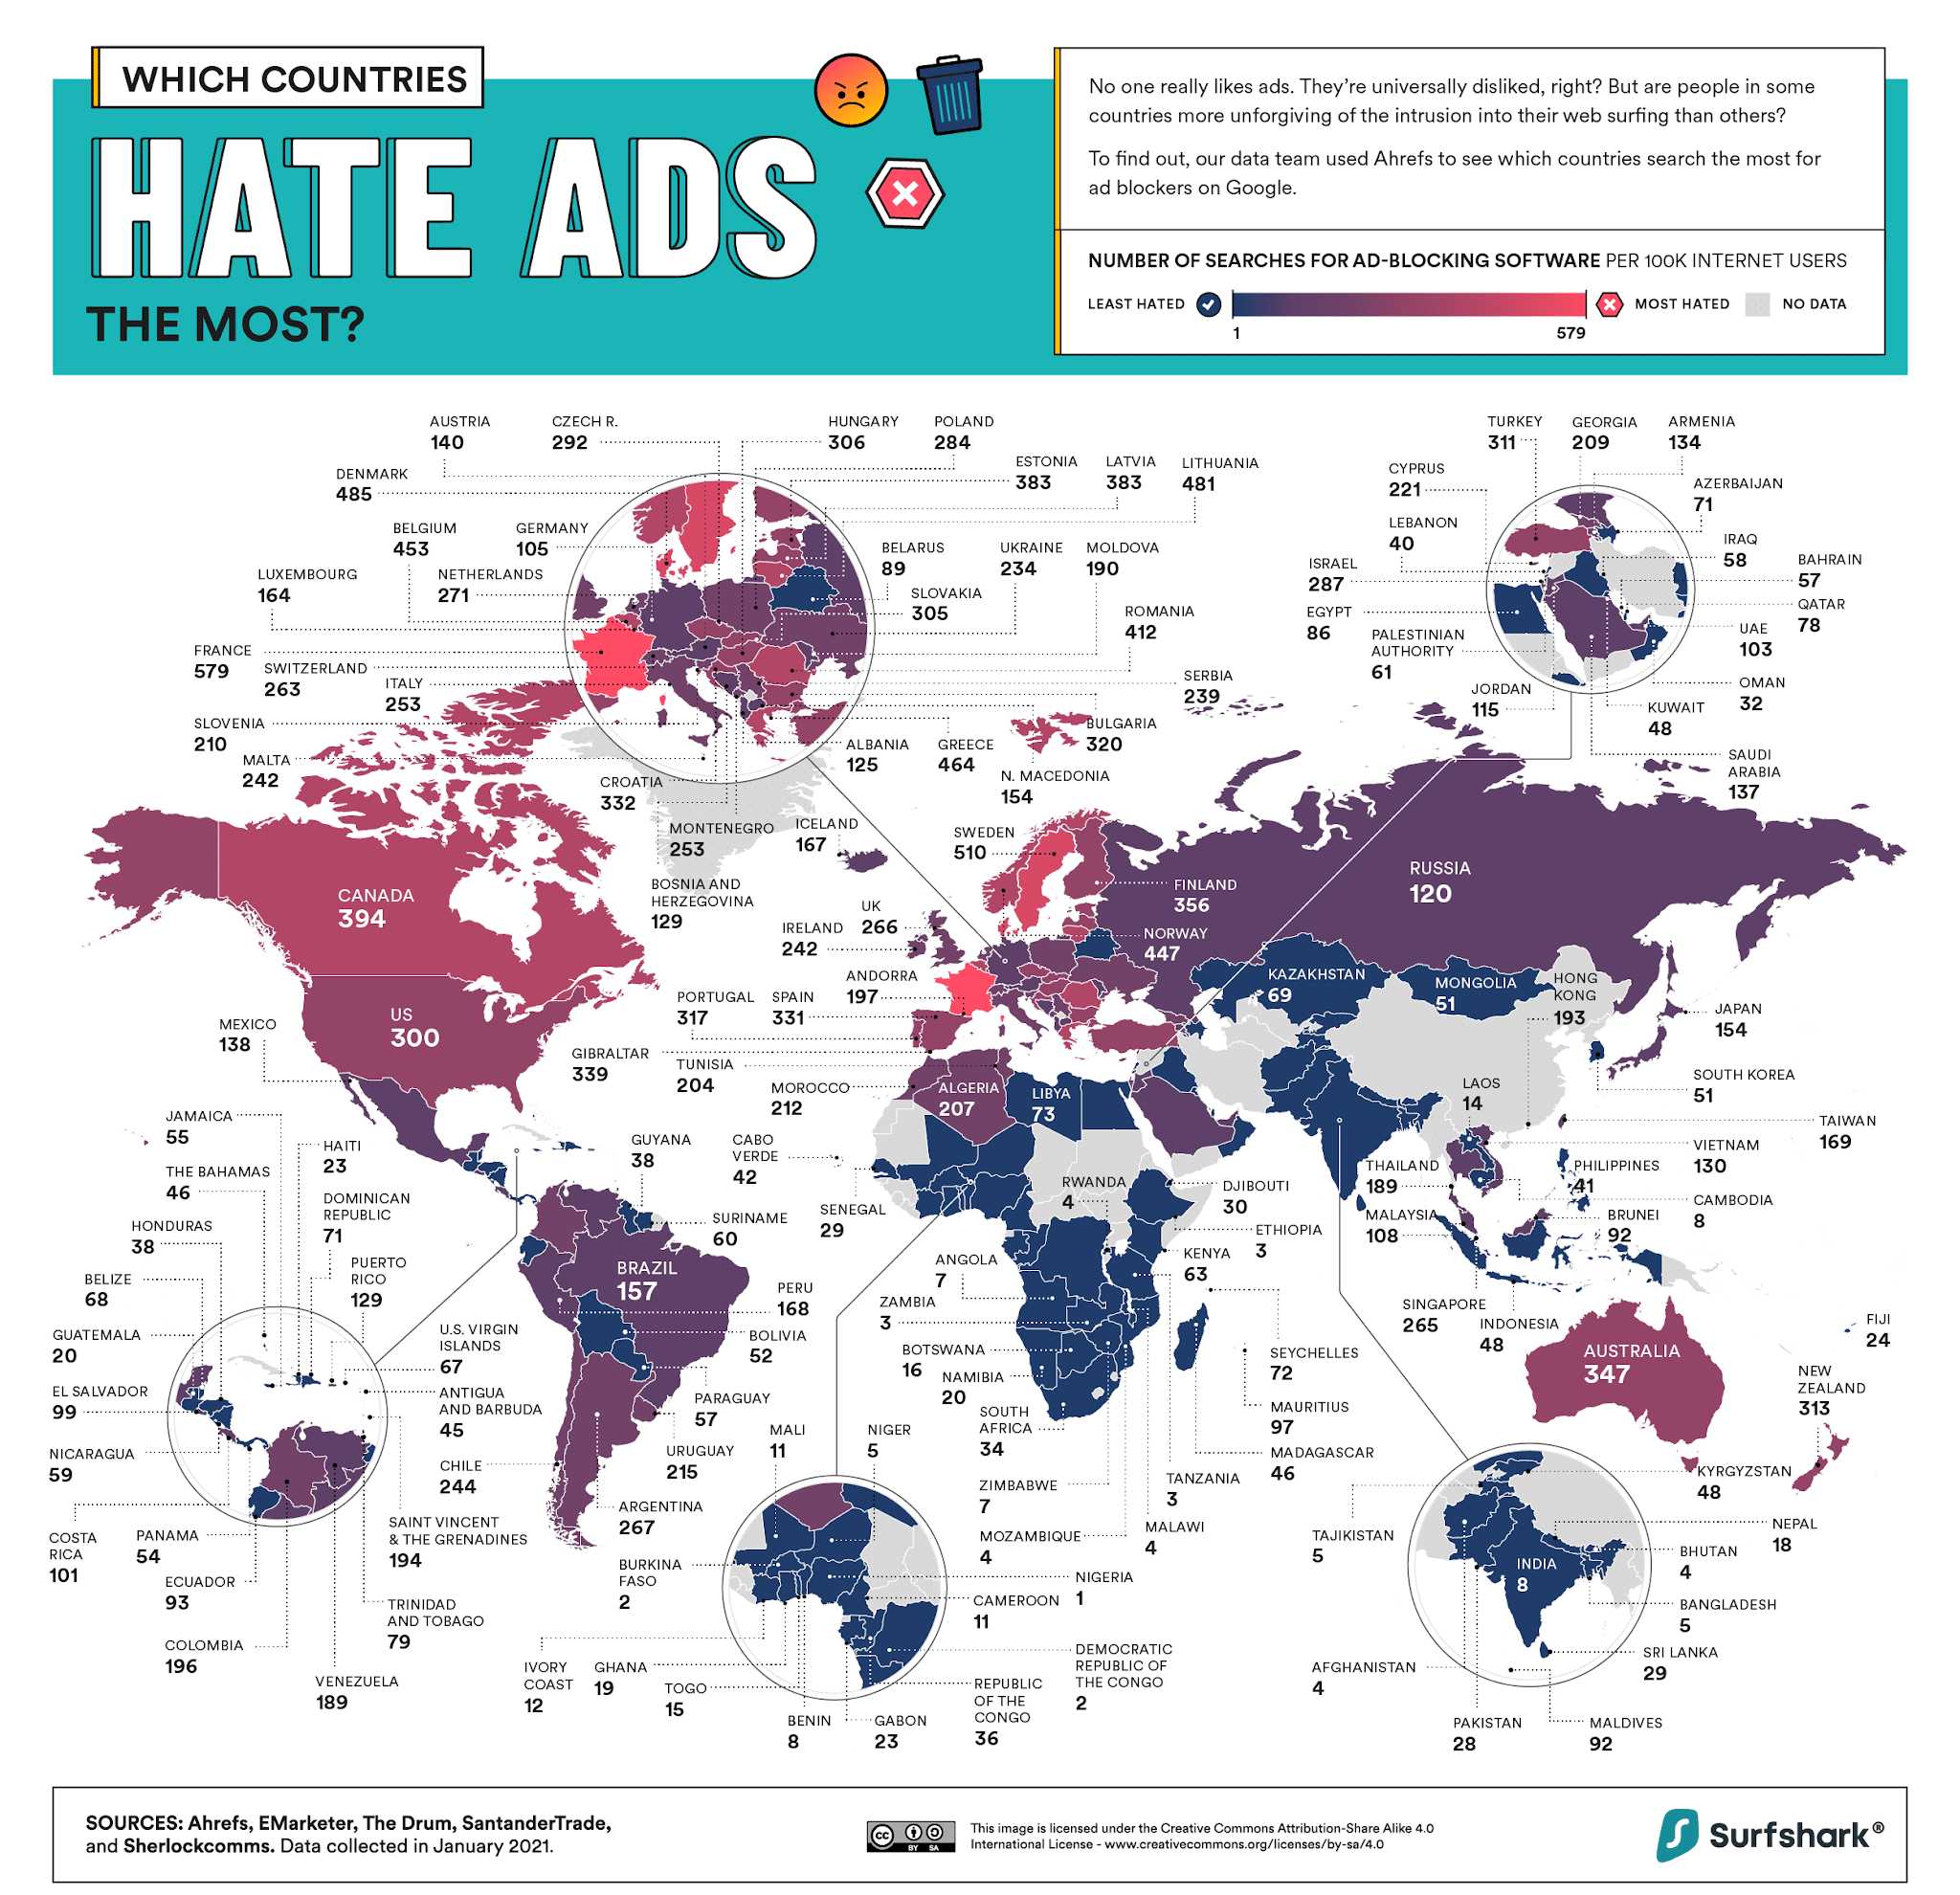 A Map of the Countries That Most Want to Block Internet Ads